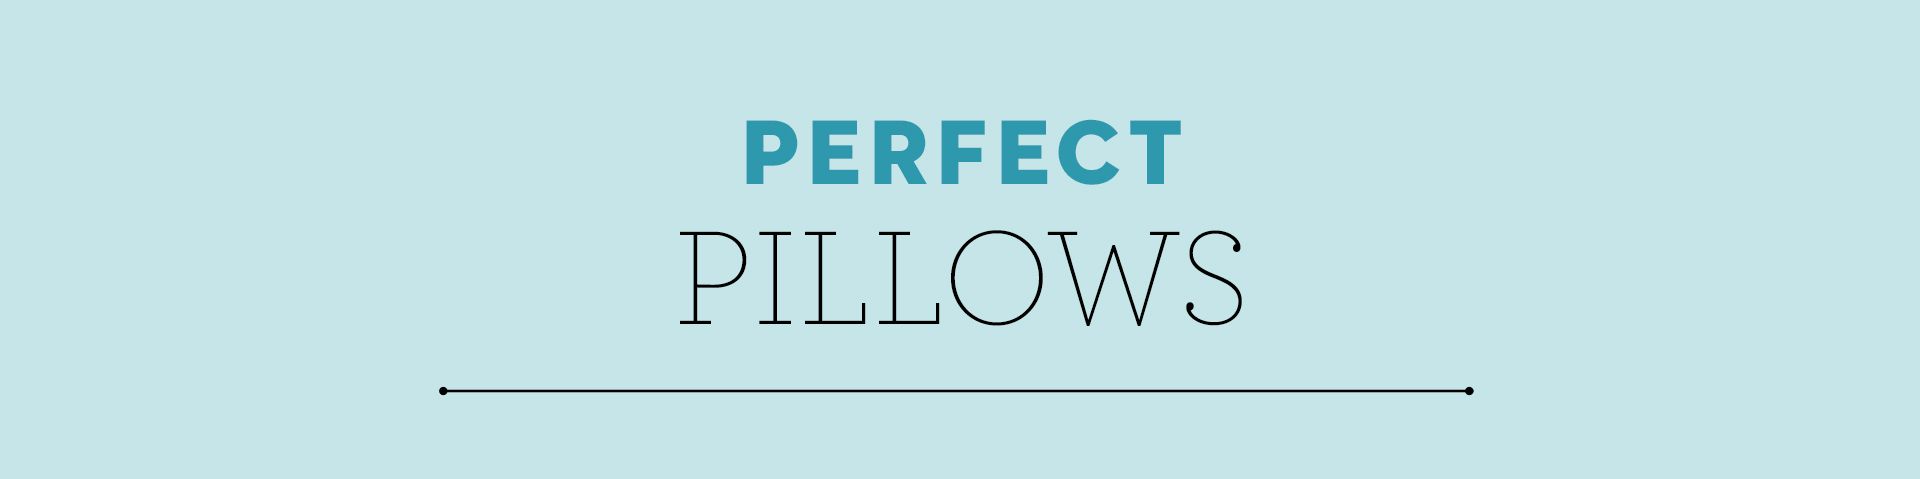 perfect pillows section header